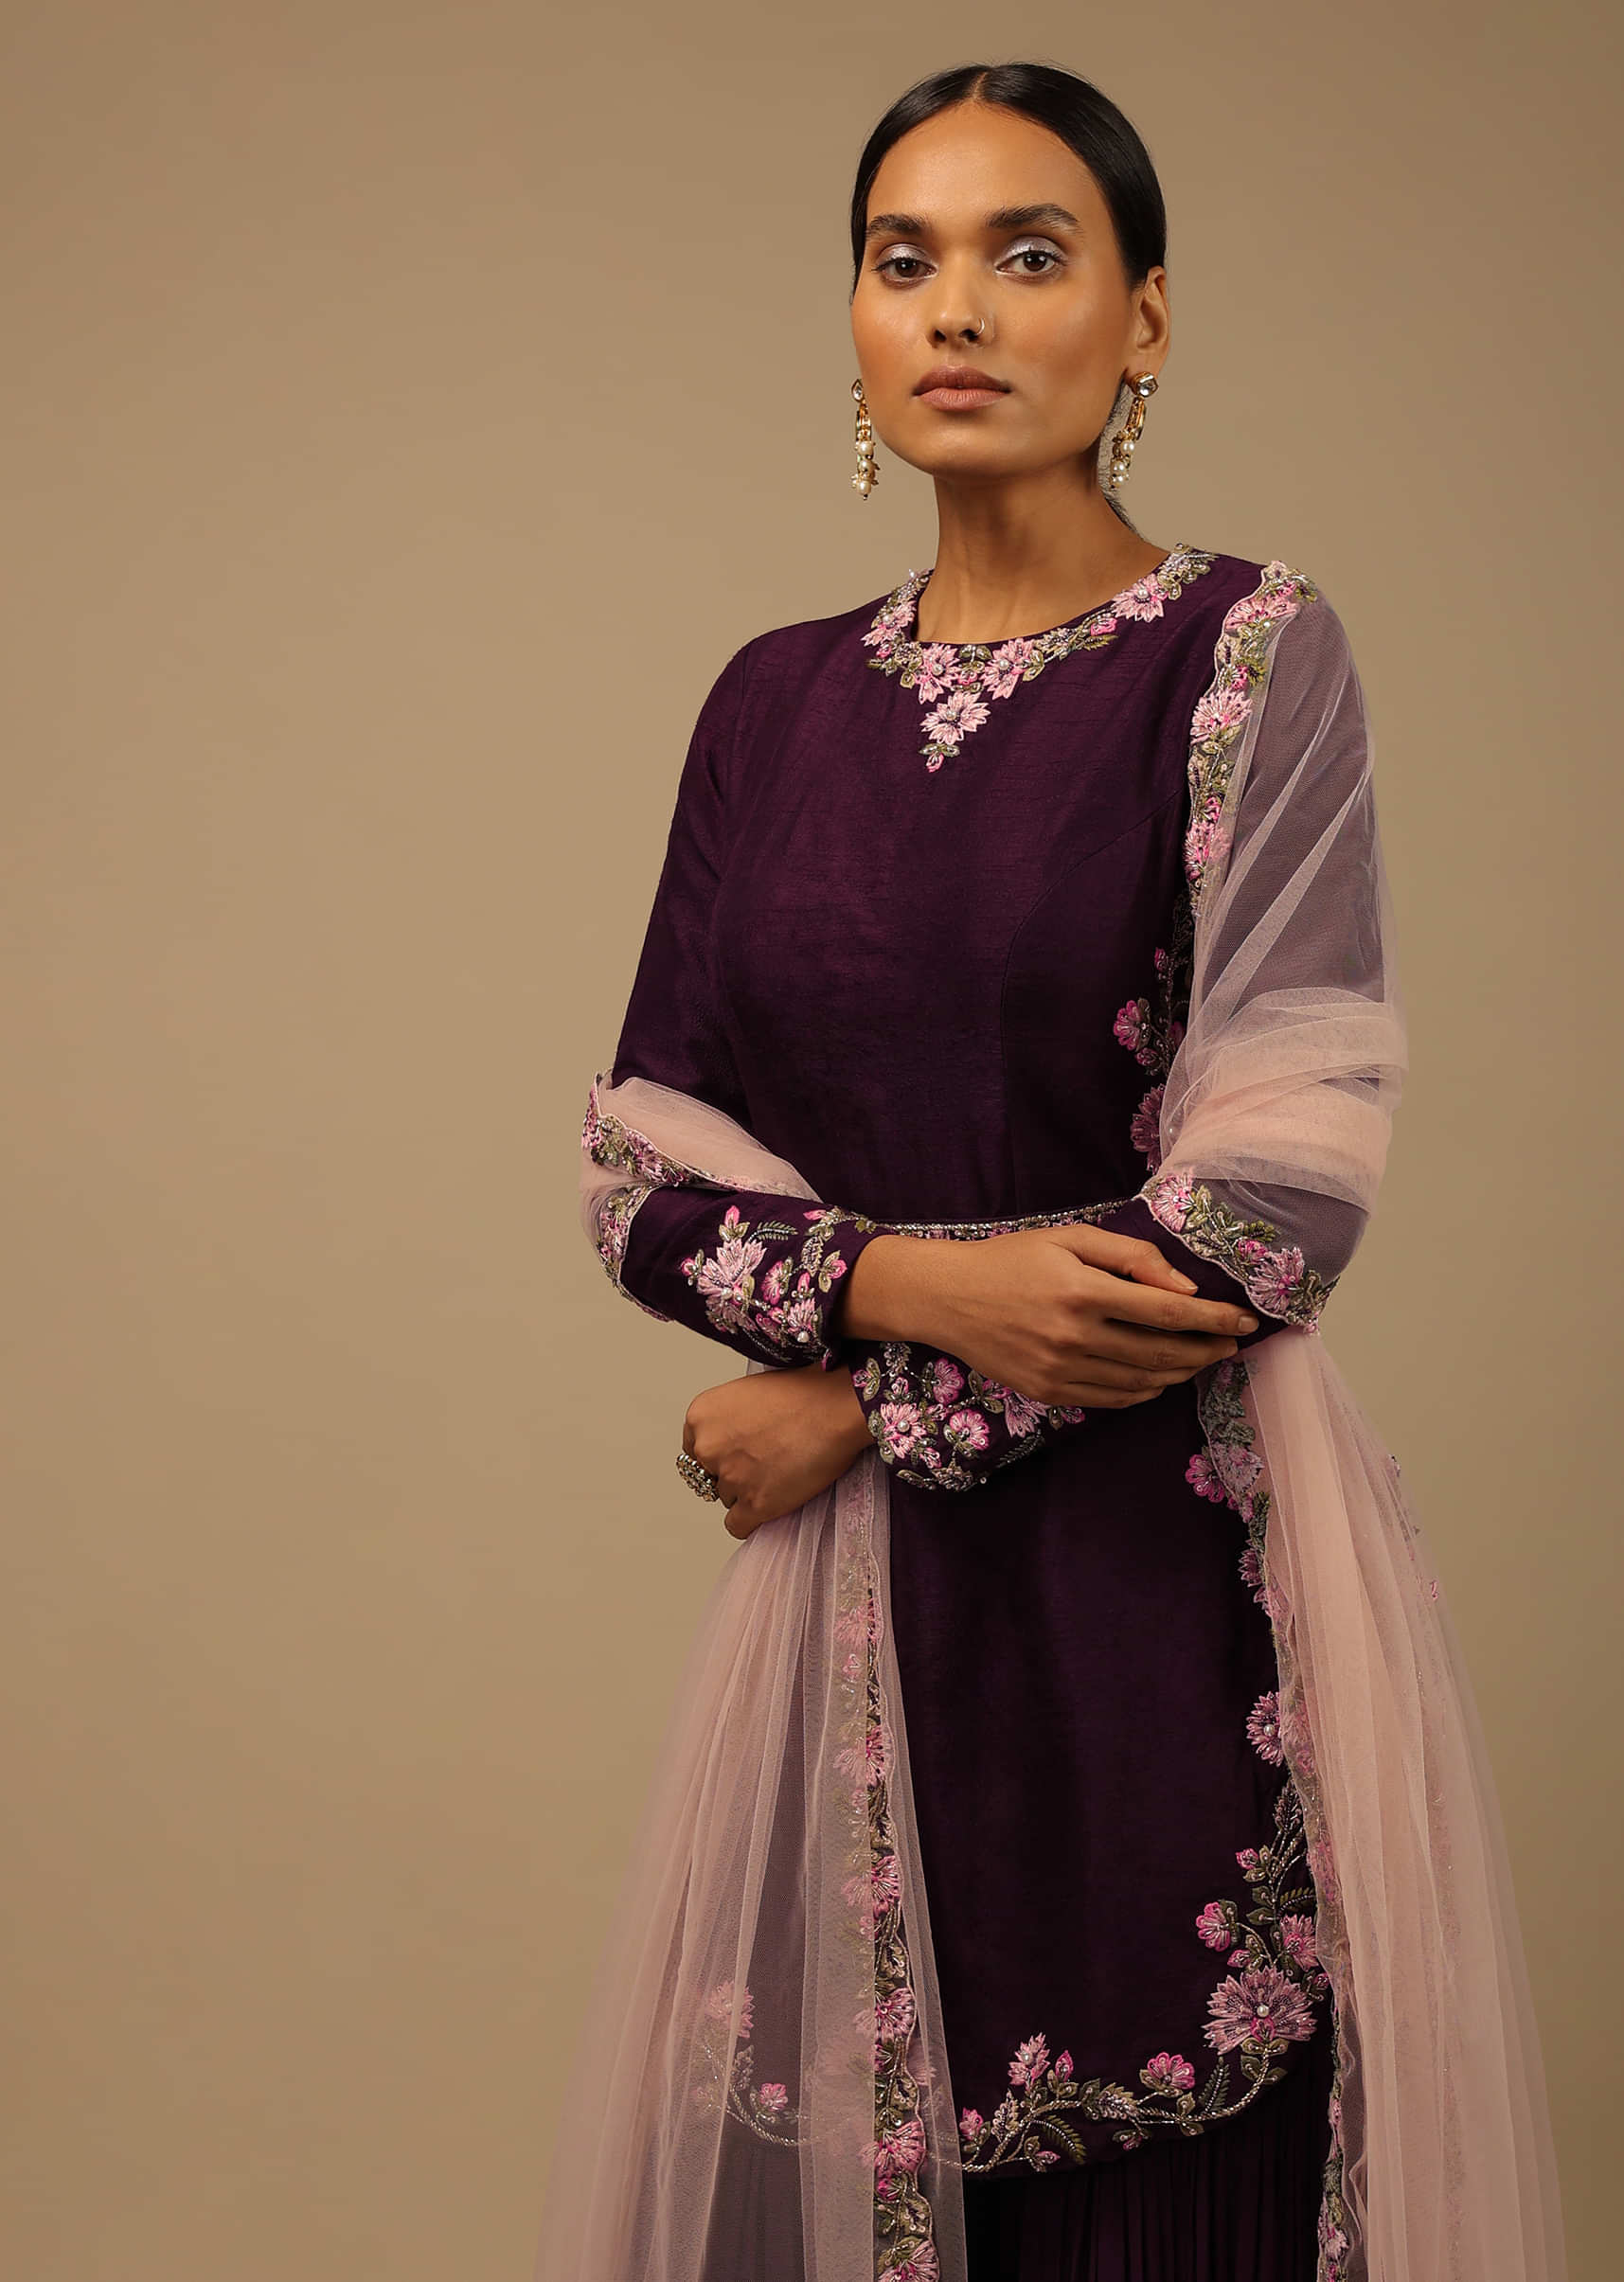 Grape Purple Sharara Suit With Multi Colored Resham Embroidered Floral Detailing And Peach Net Dupatta